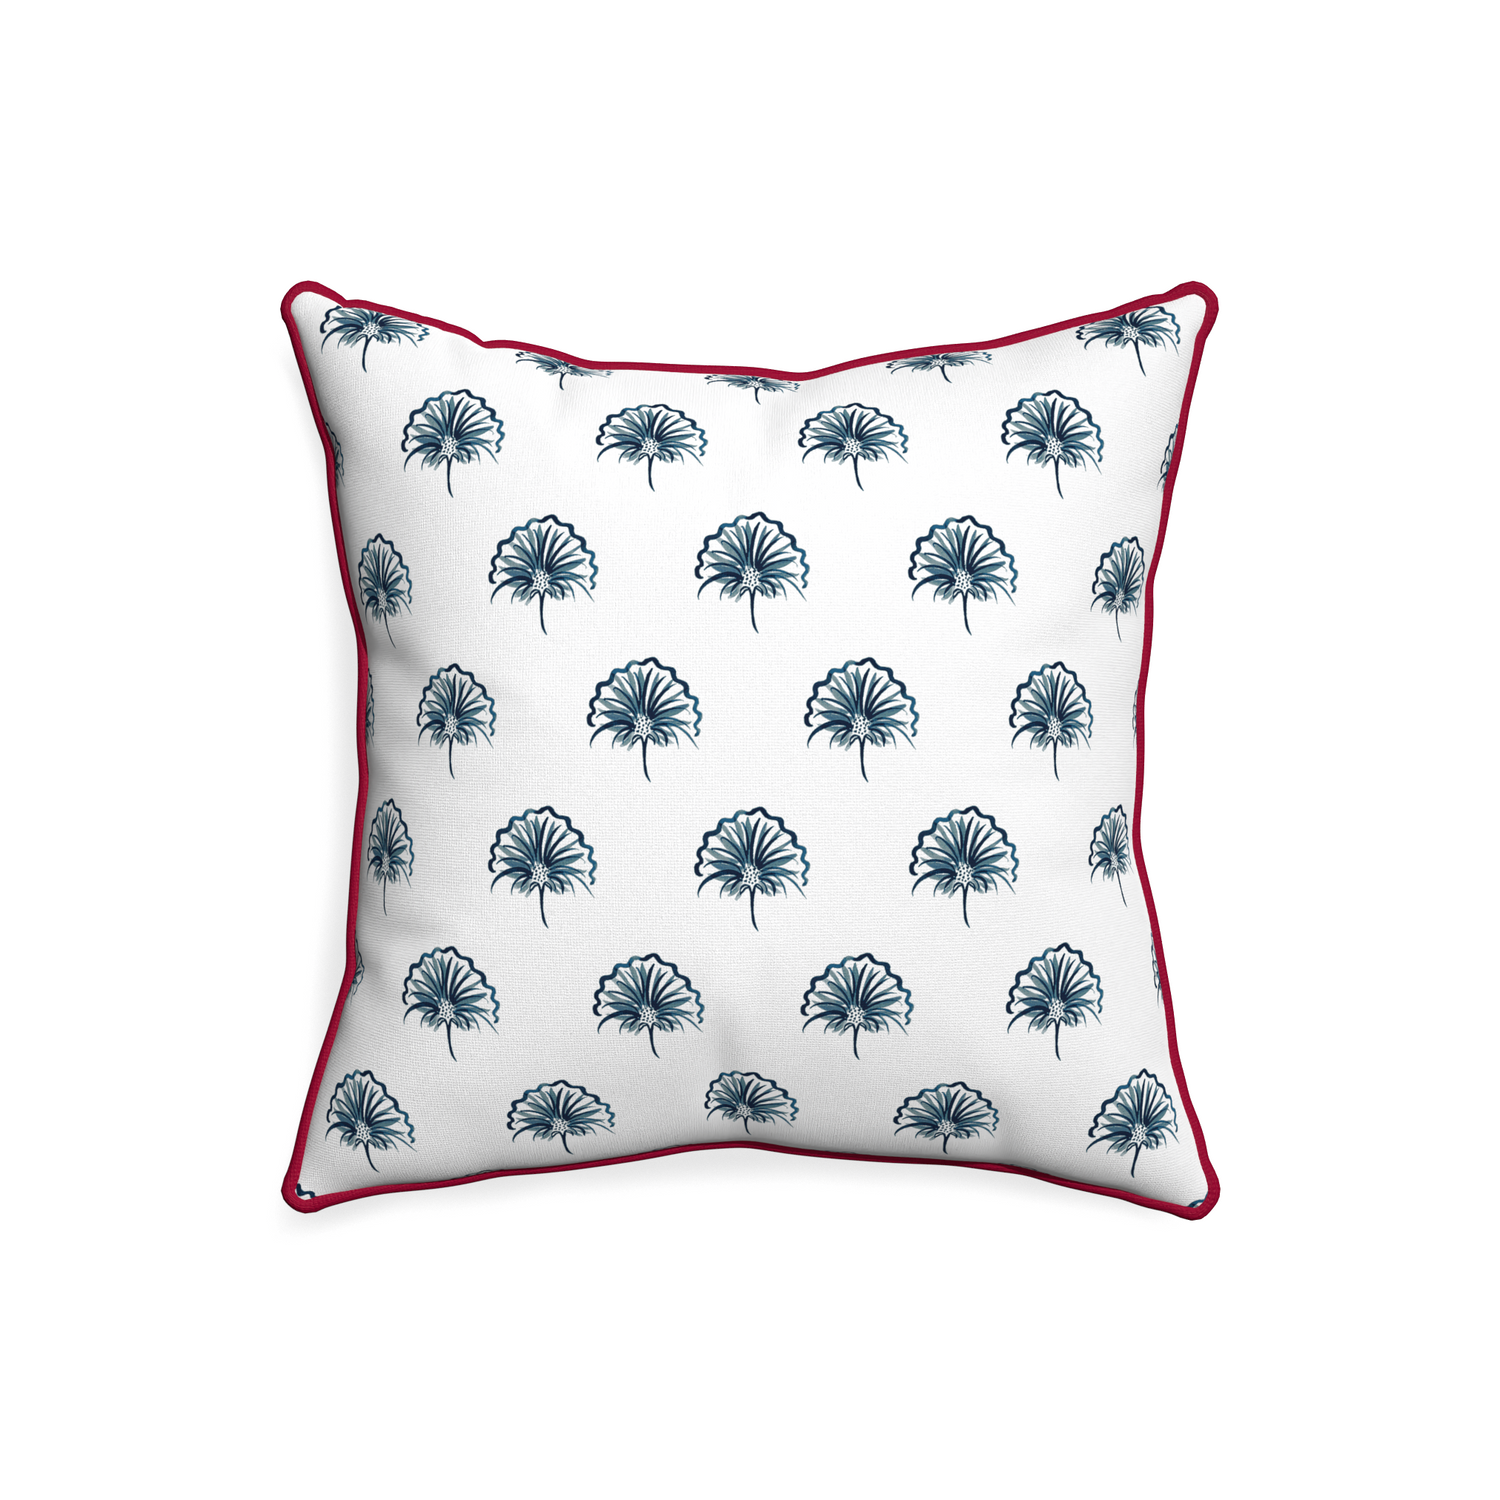 20-square penelope midnight custom floral navypillow with raspberry piping on white background